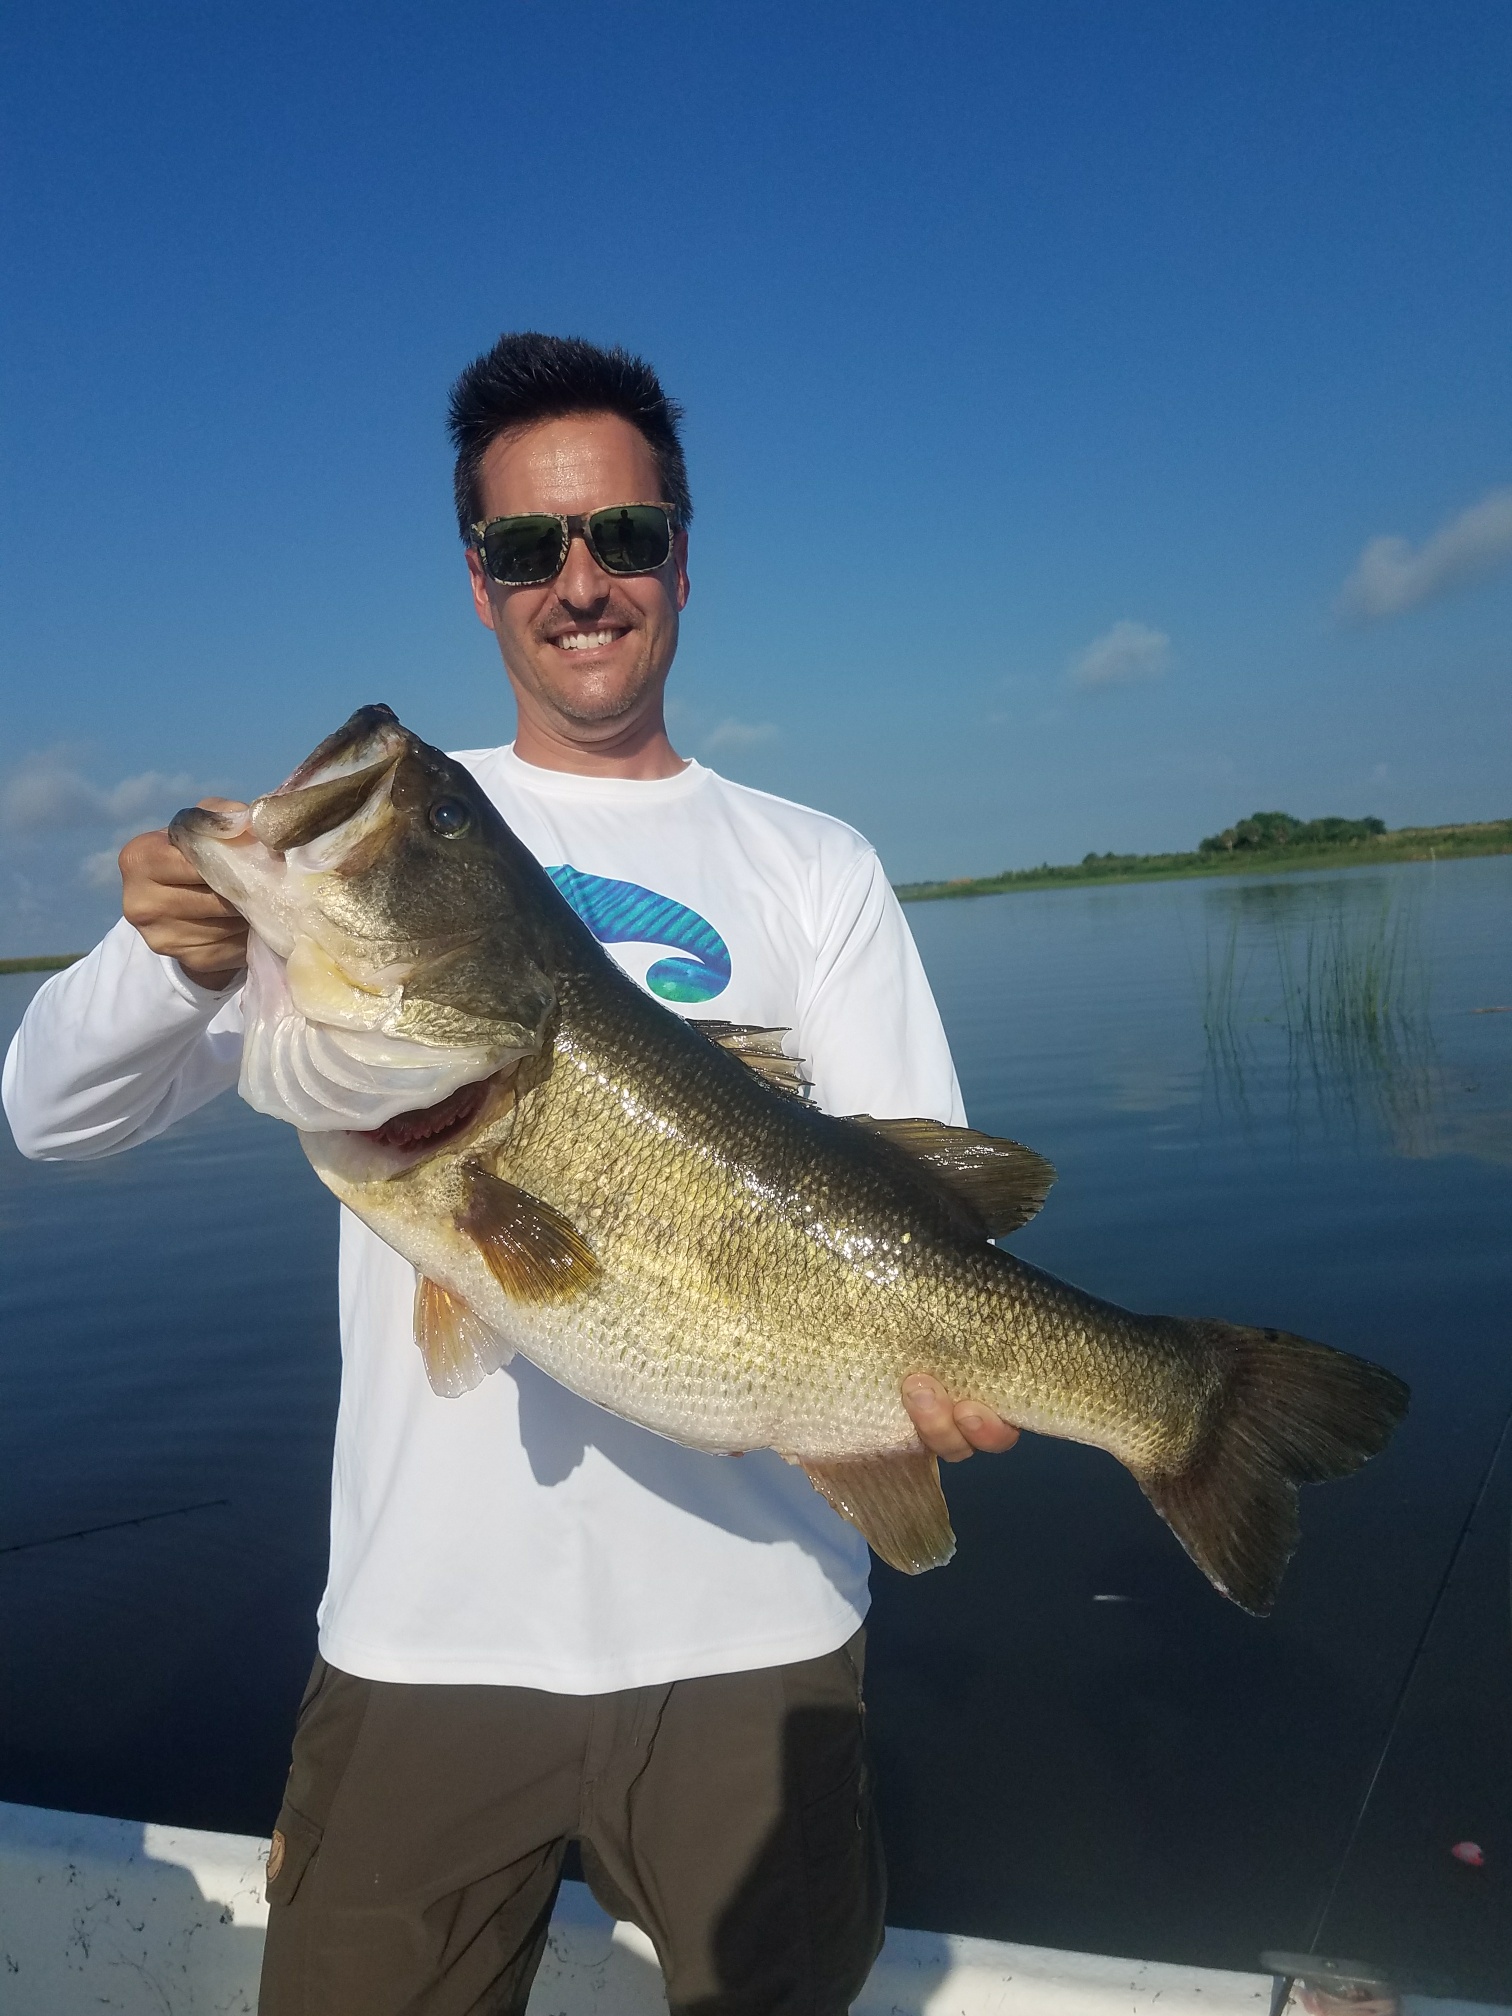 Fast Break Bait and Tackle Archives - Lake Okeechobee Bass Fishing Guides